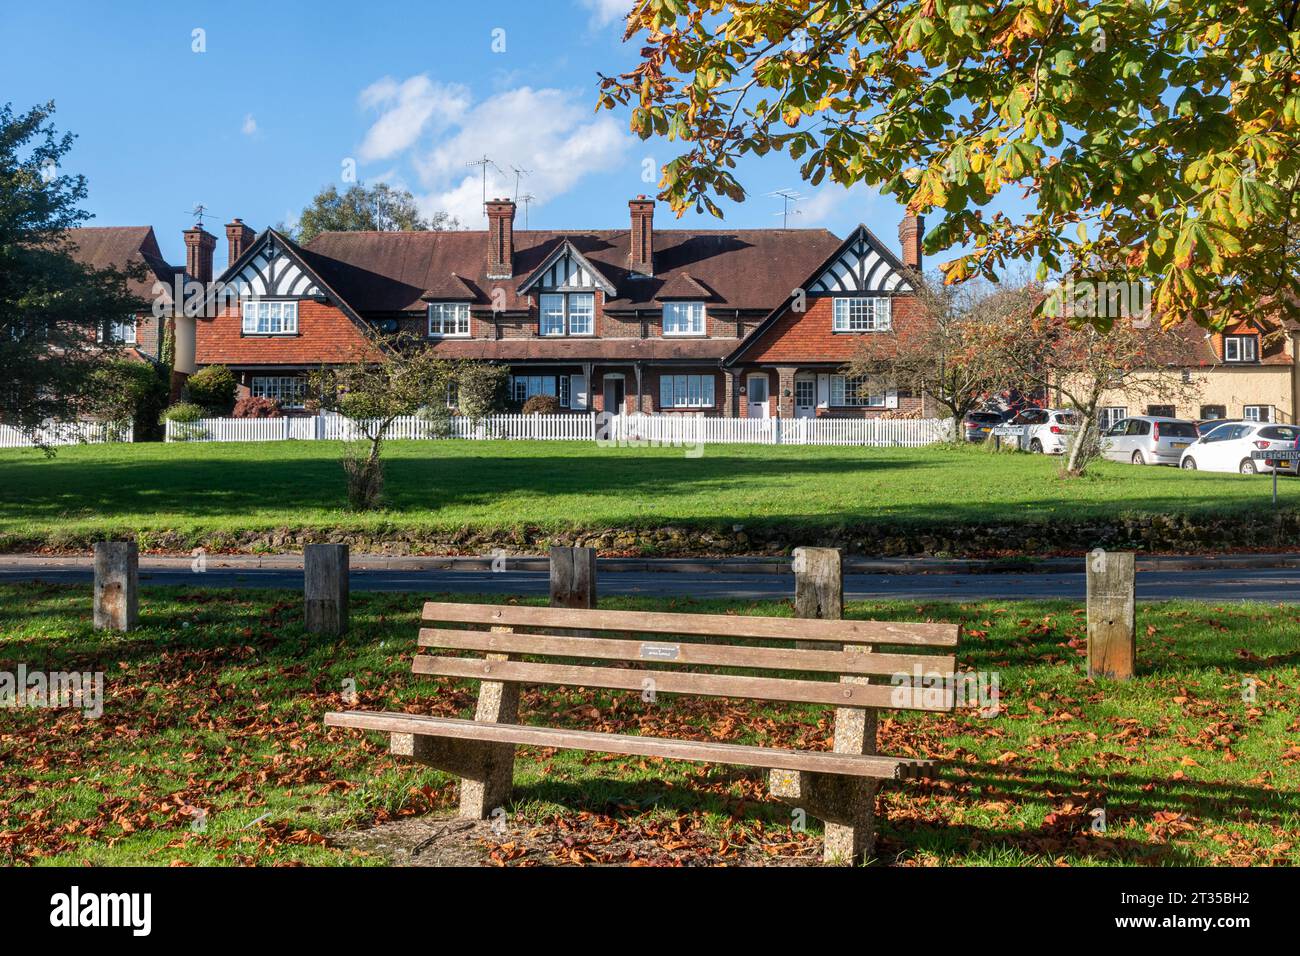 Godstone, Surrey, England, UK, view of the pretty village on a sunny October or autumn day Stock Photo